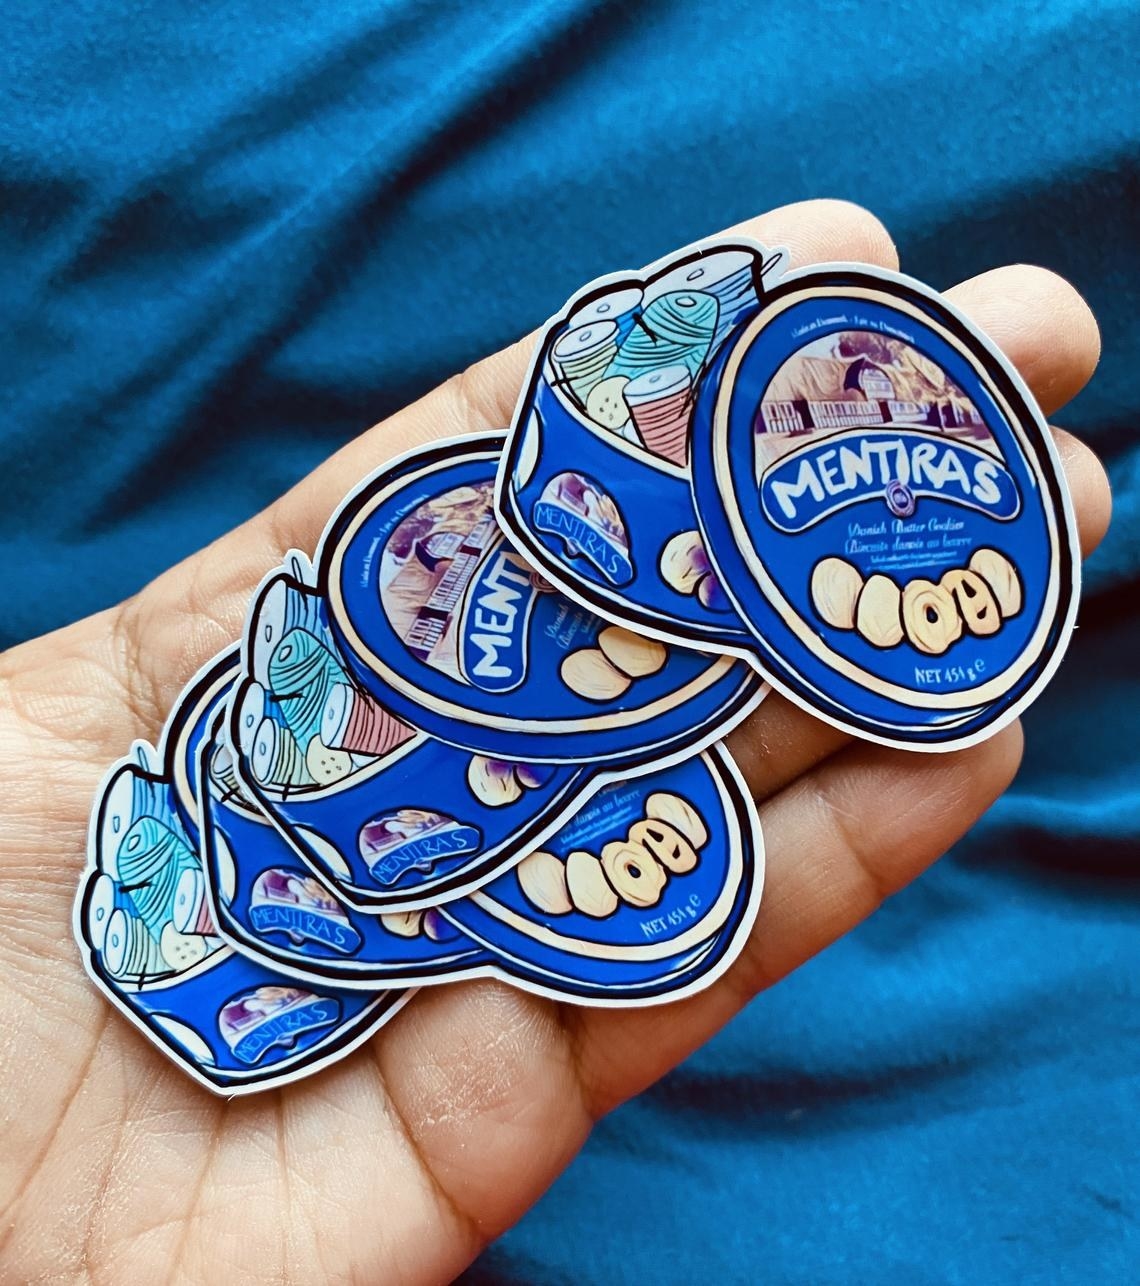 A hand holding a few of the Mentiras blue cookie tin sticker.